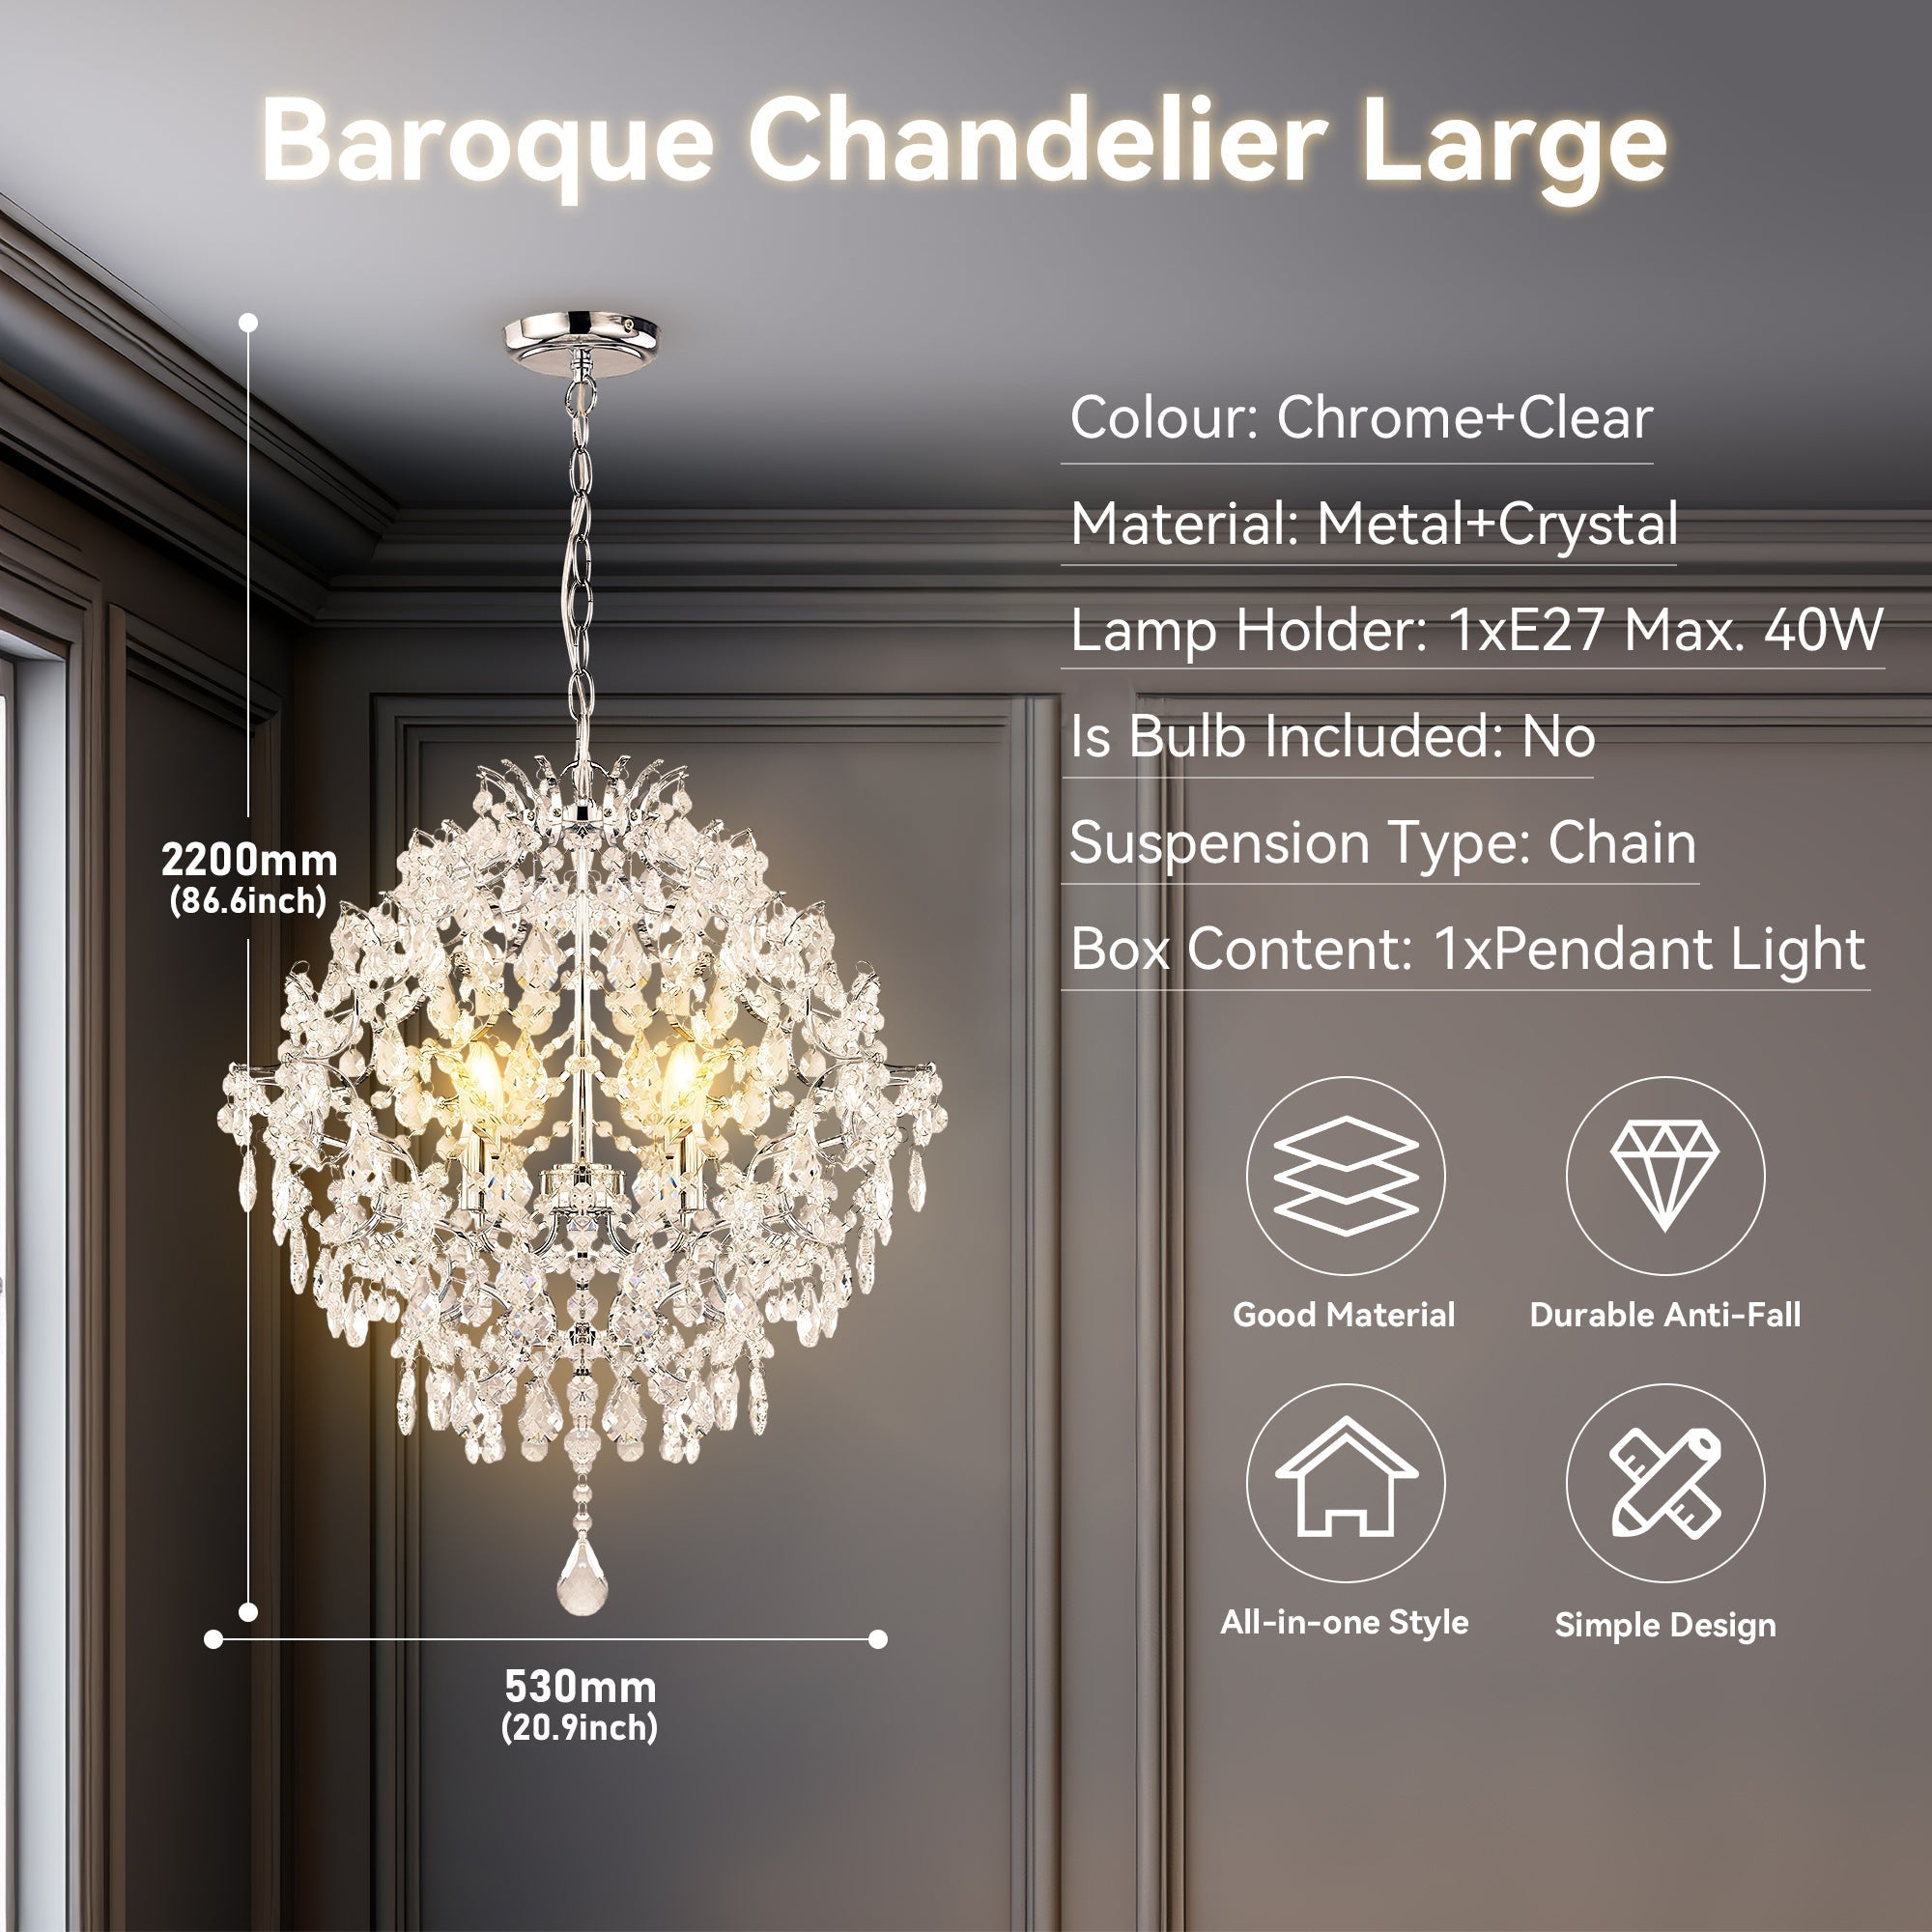 Baroque 3 Light Large Chandelier Chrome & Clear - LL002CH113L